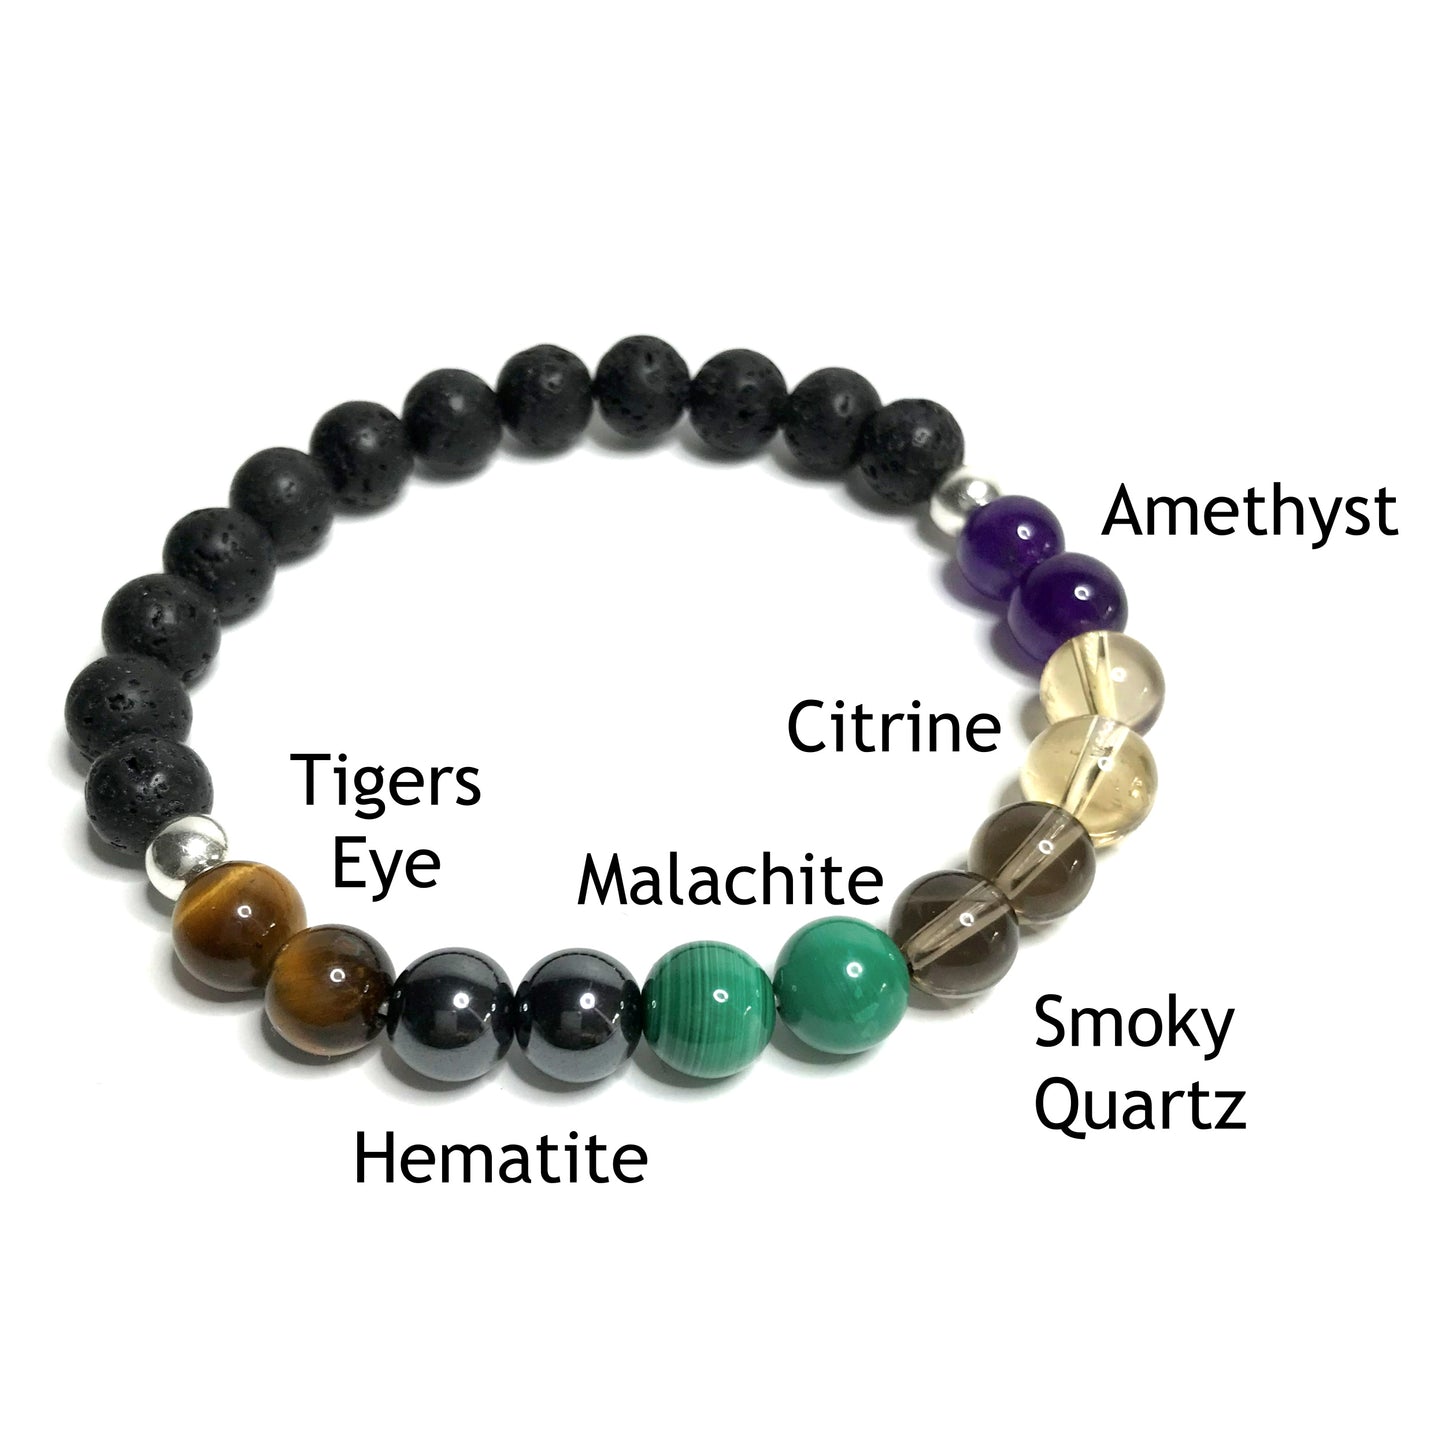 Addiction recovery bracelet with lava rock with the beads labelled as tiger's eye, hematite, malachite, smoky quartz, citrine and amethyst